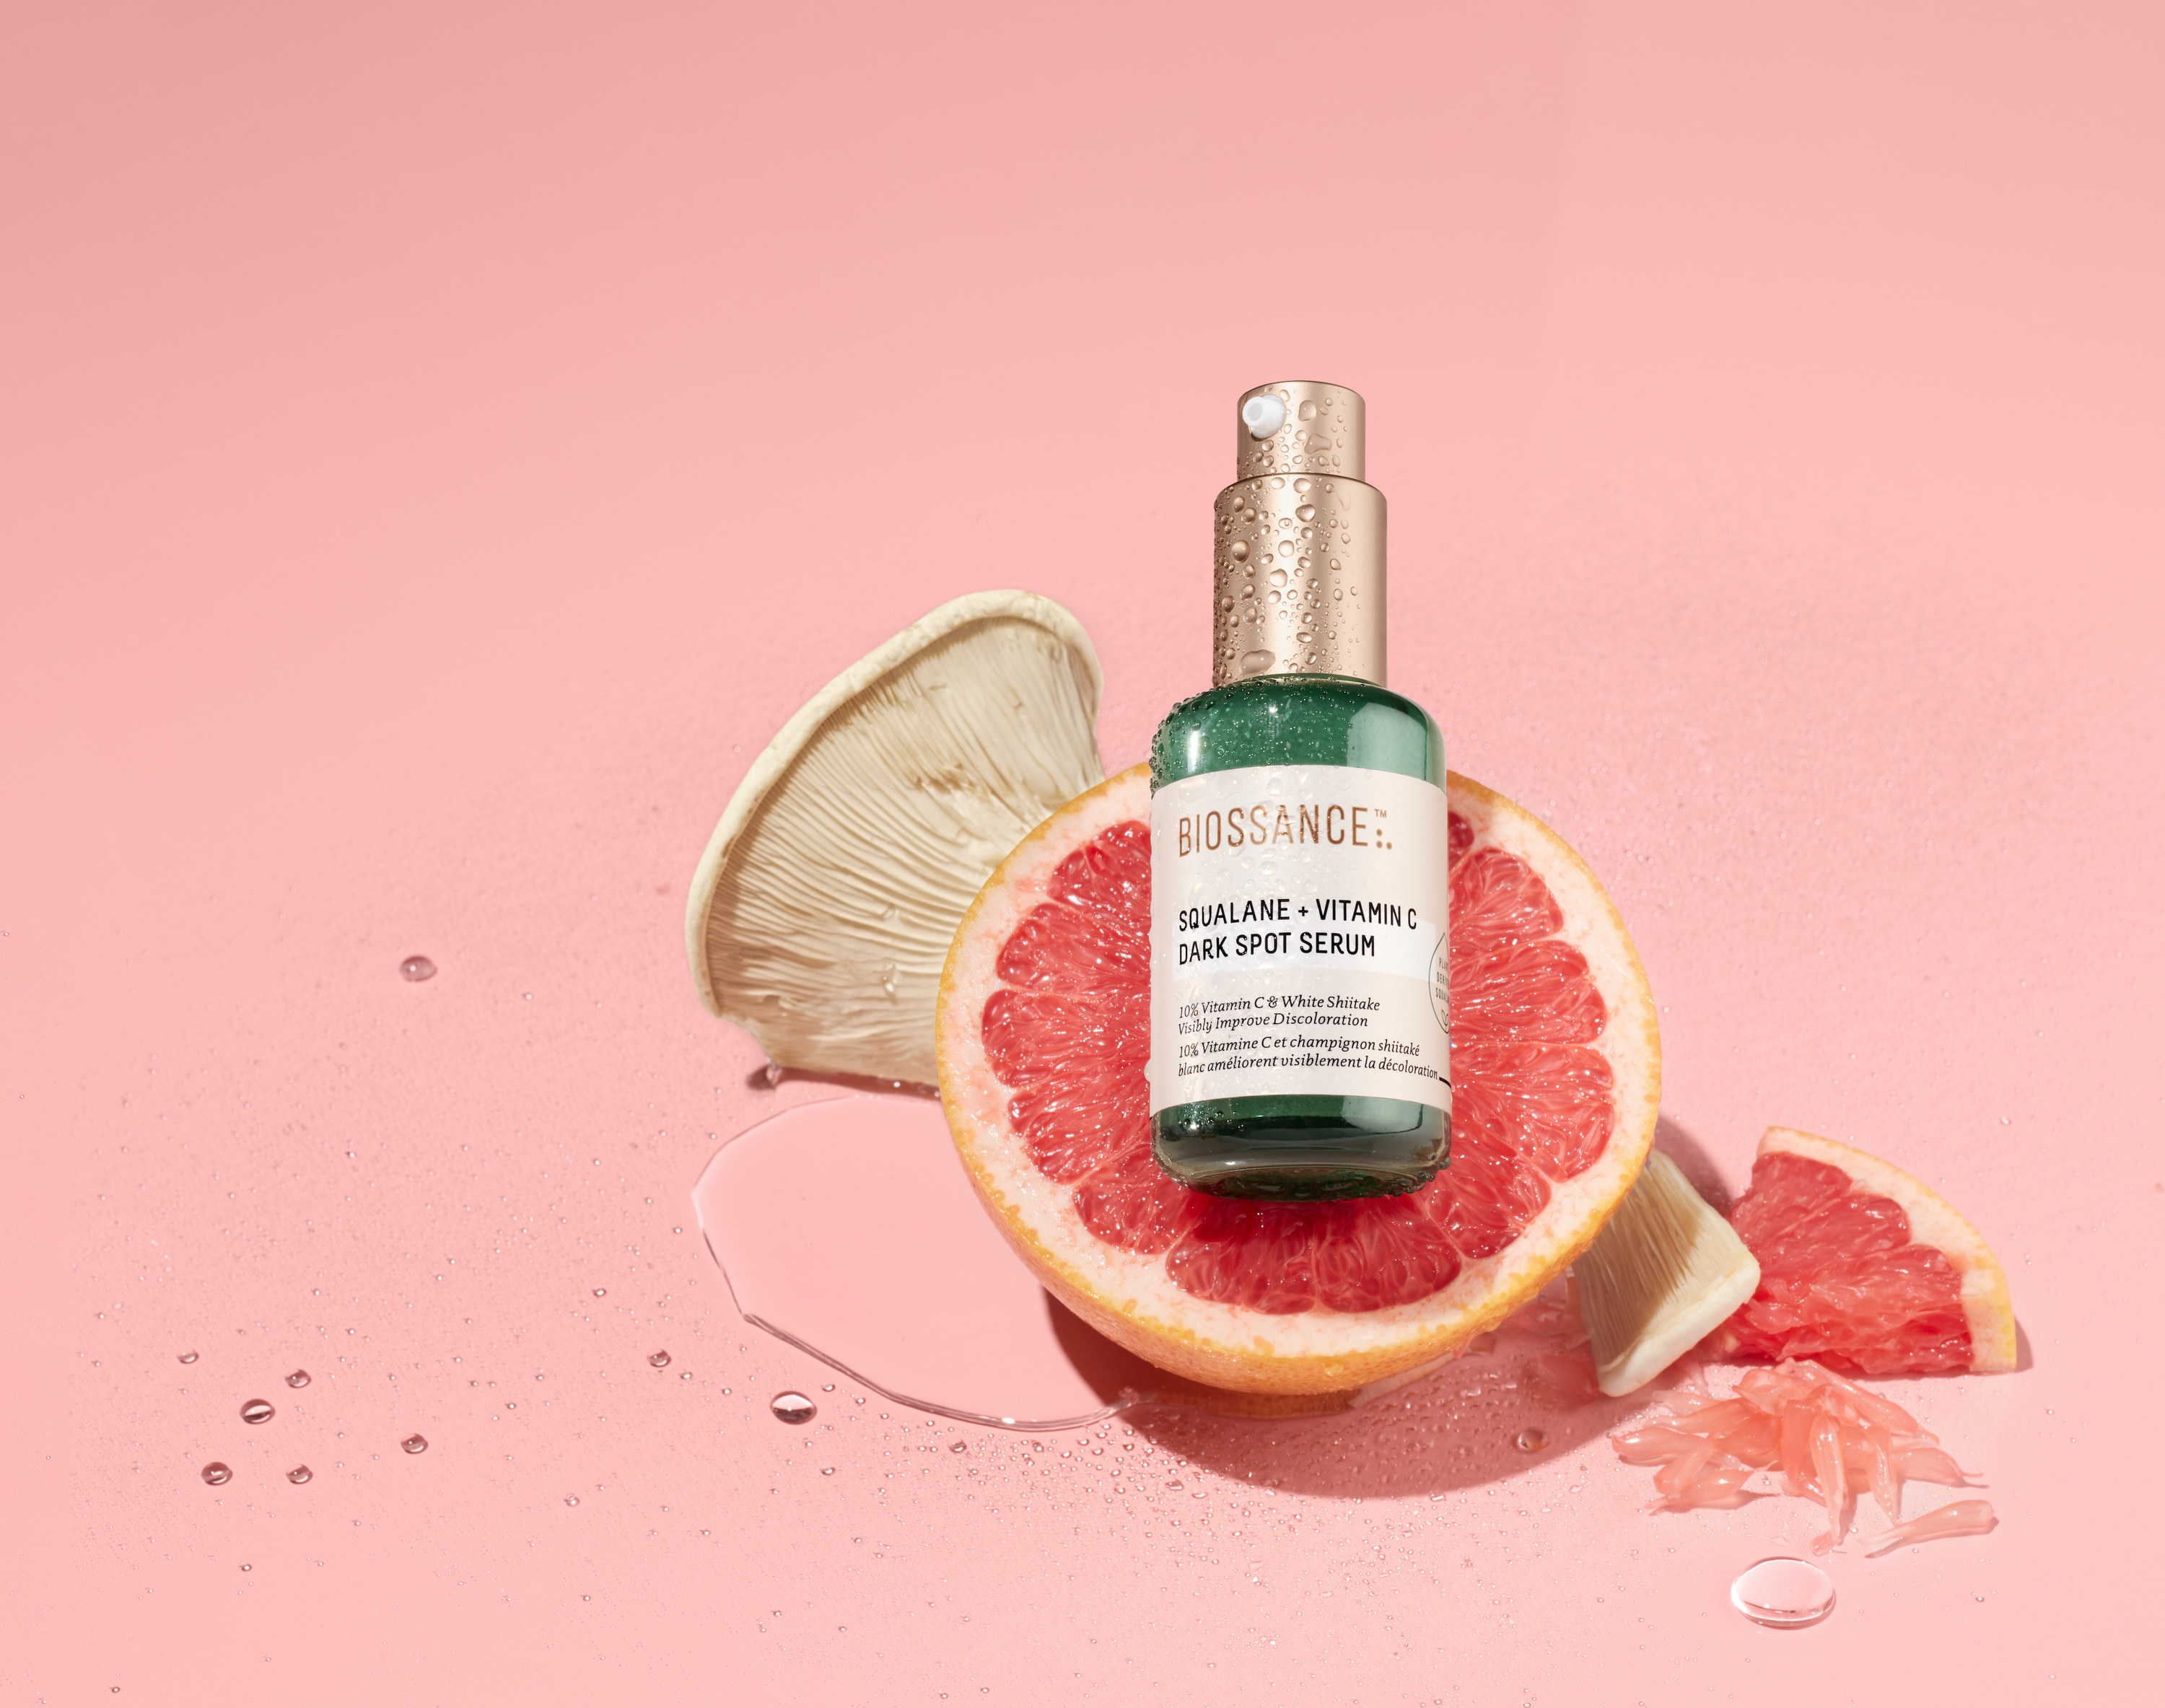 The Squalane and Vitamin C Dark Spot Serum atop a cluster of grapefruit and white mushroom 